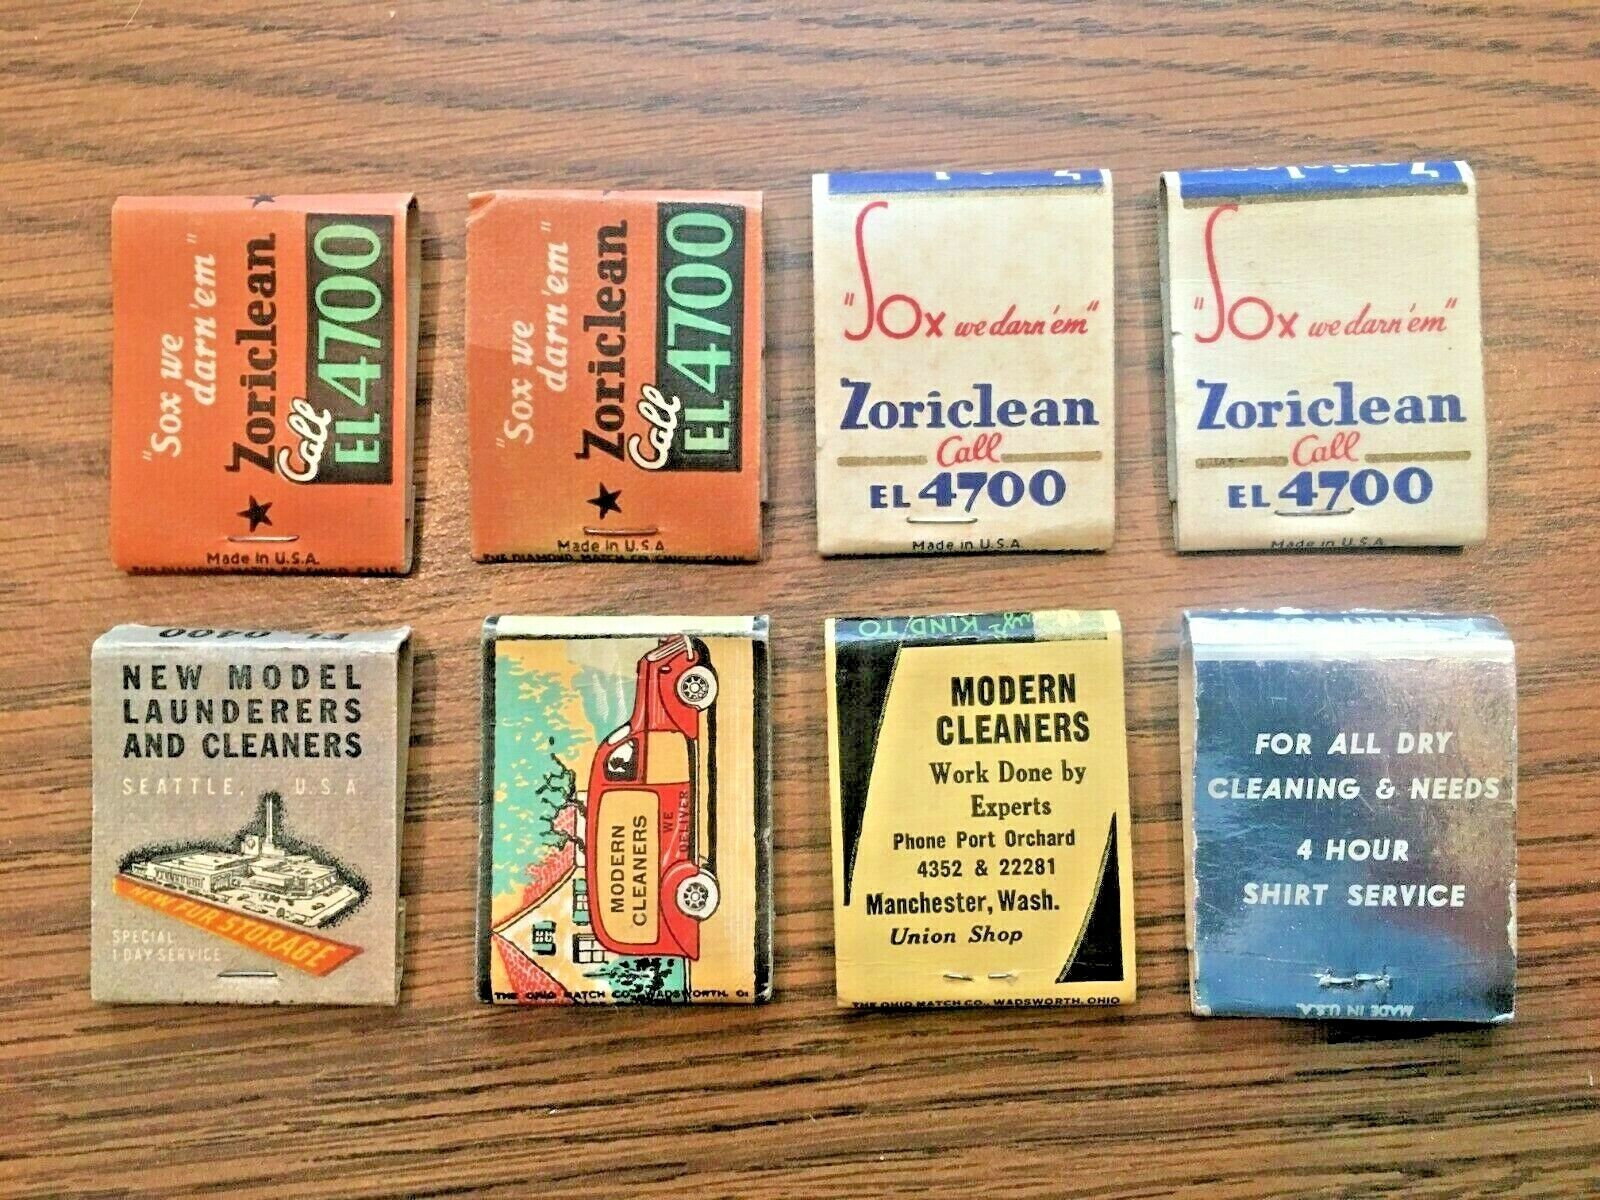 Lot 8 Vintage Dry Cleaning Laundry Laundromat Cleaners Pacific Northwest Seattle